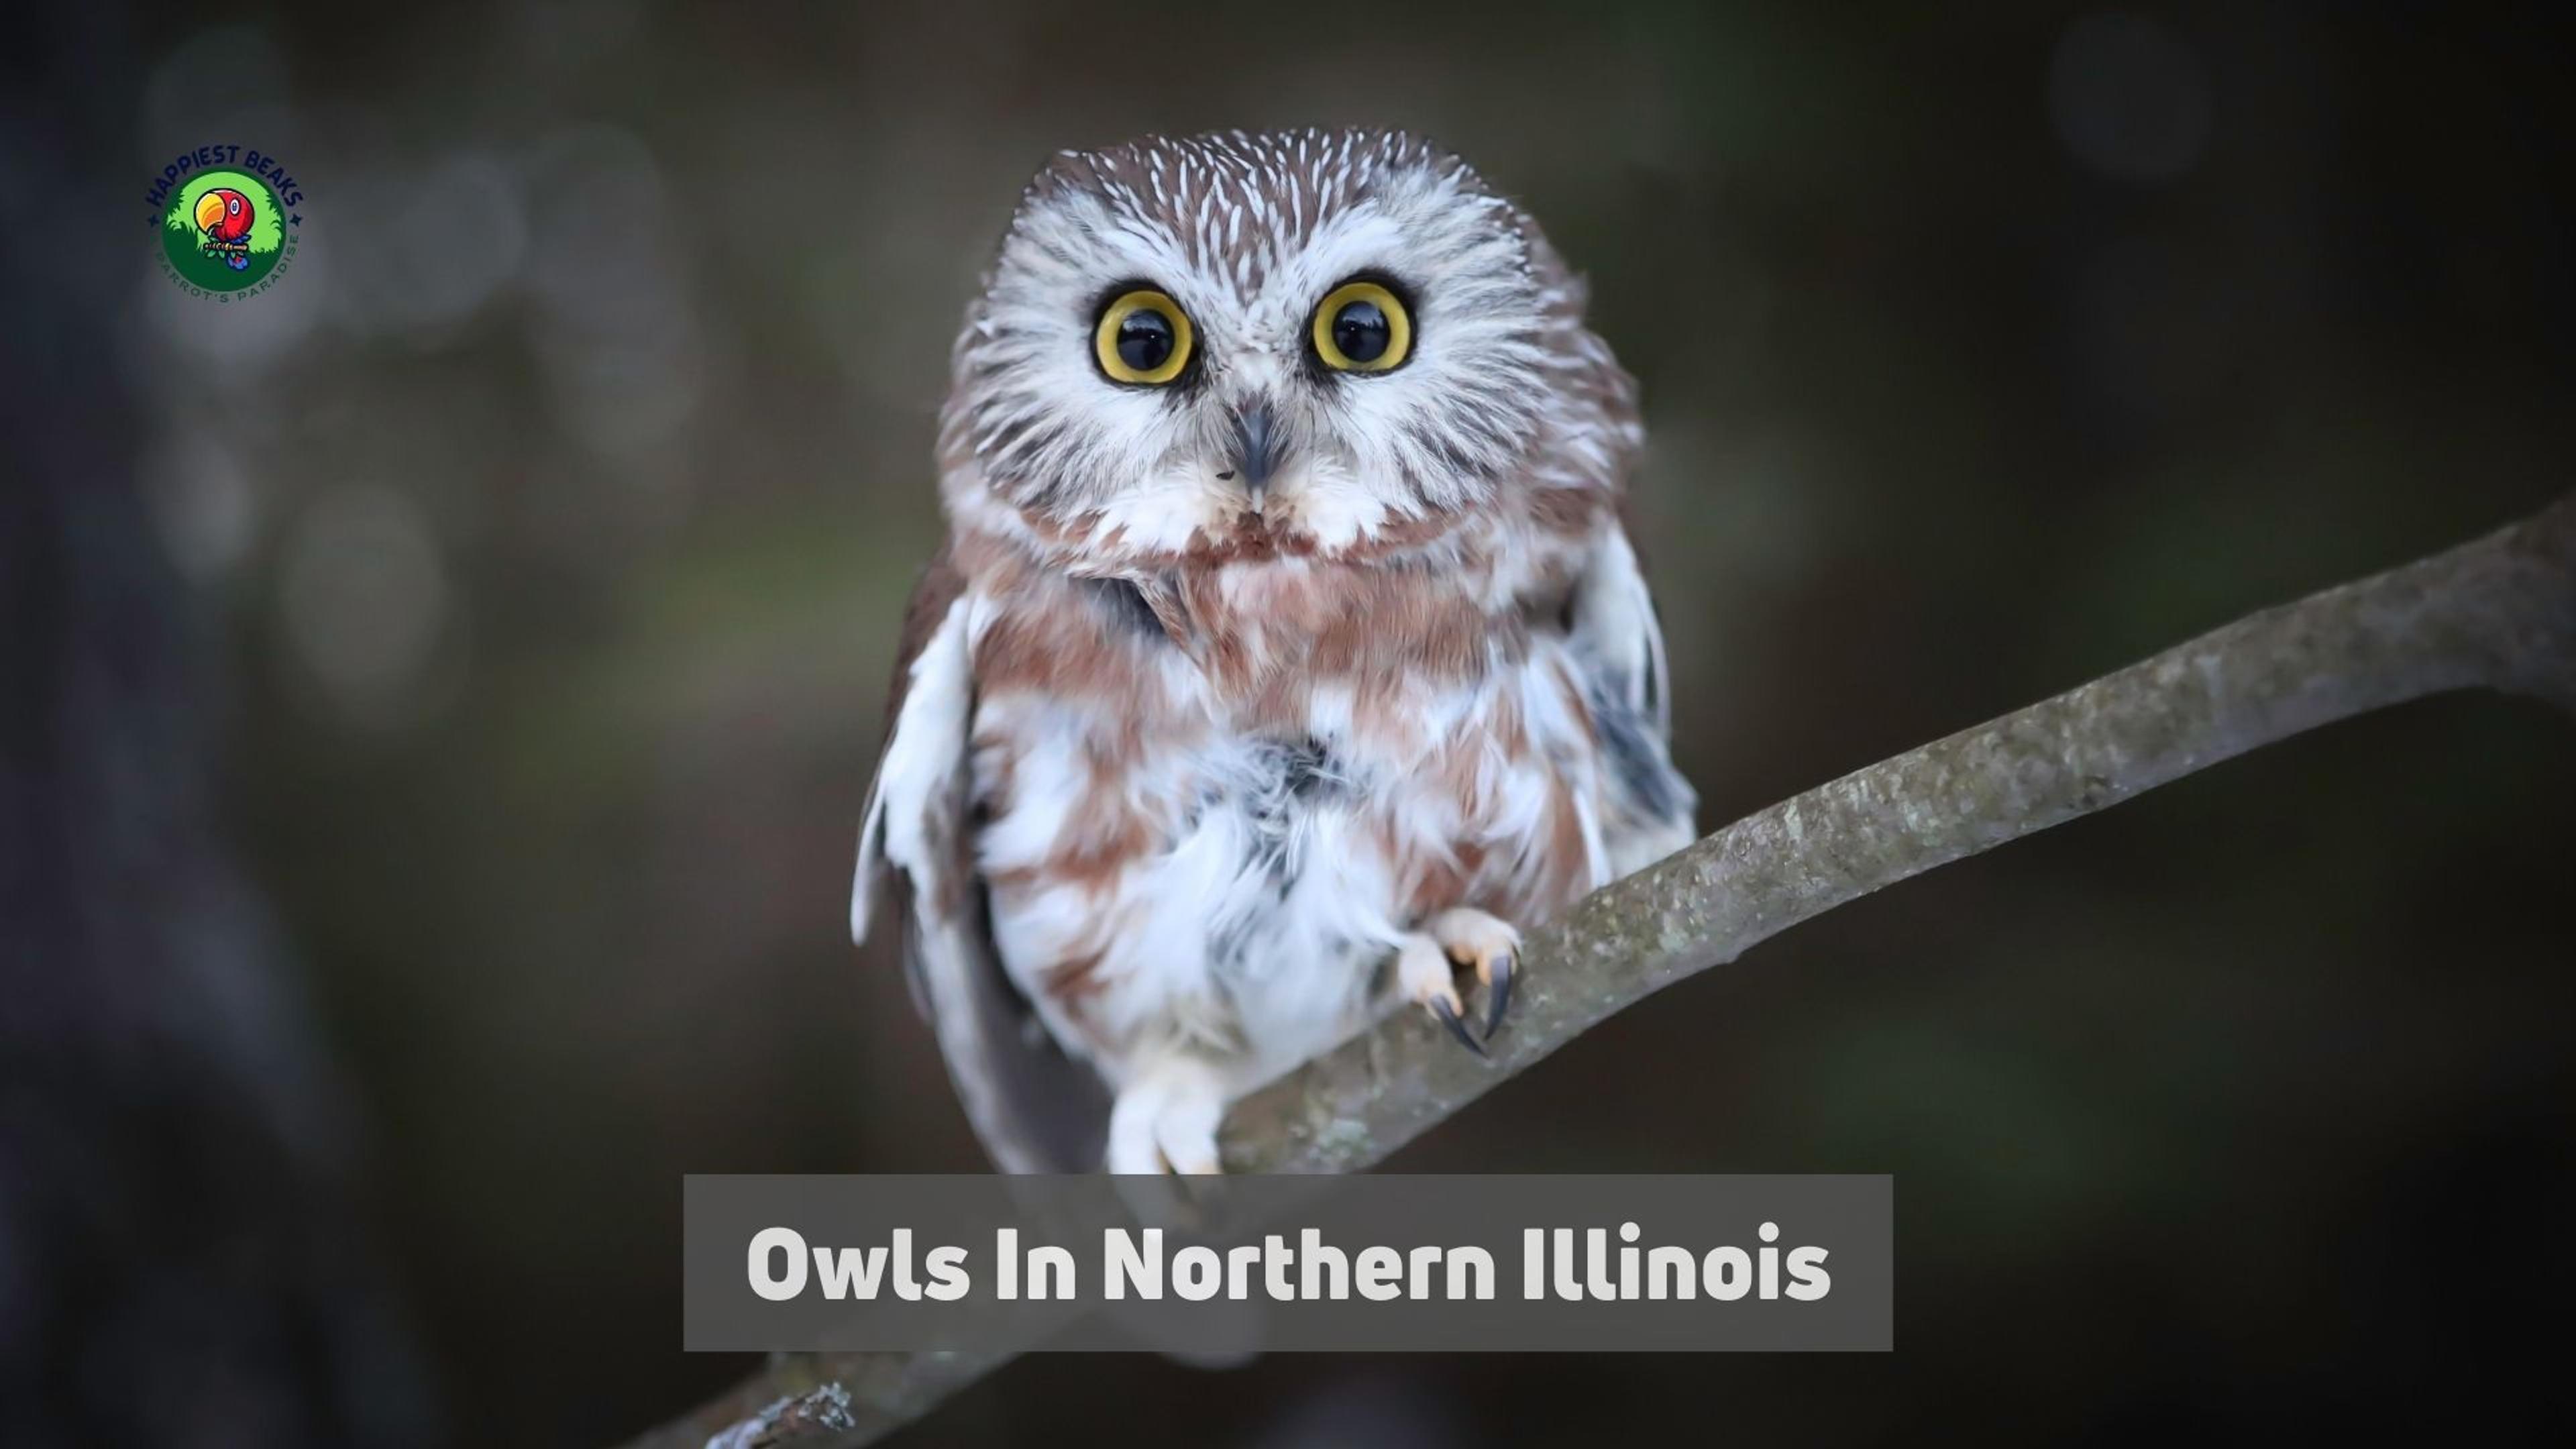 Owls in Northern Illinois